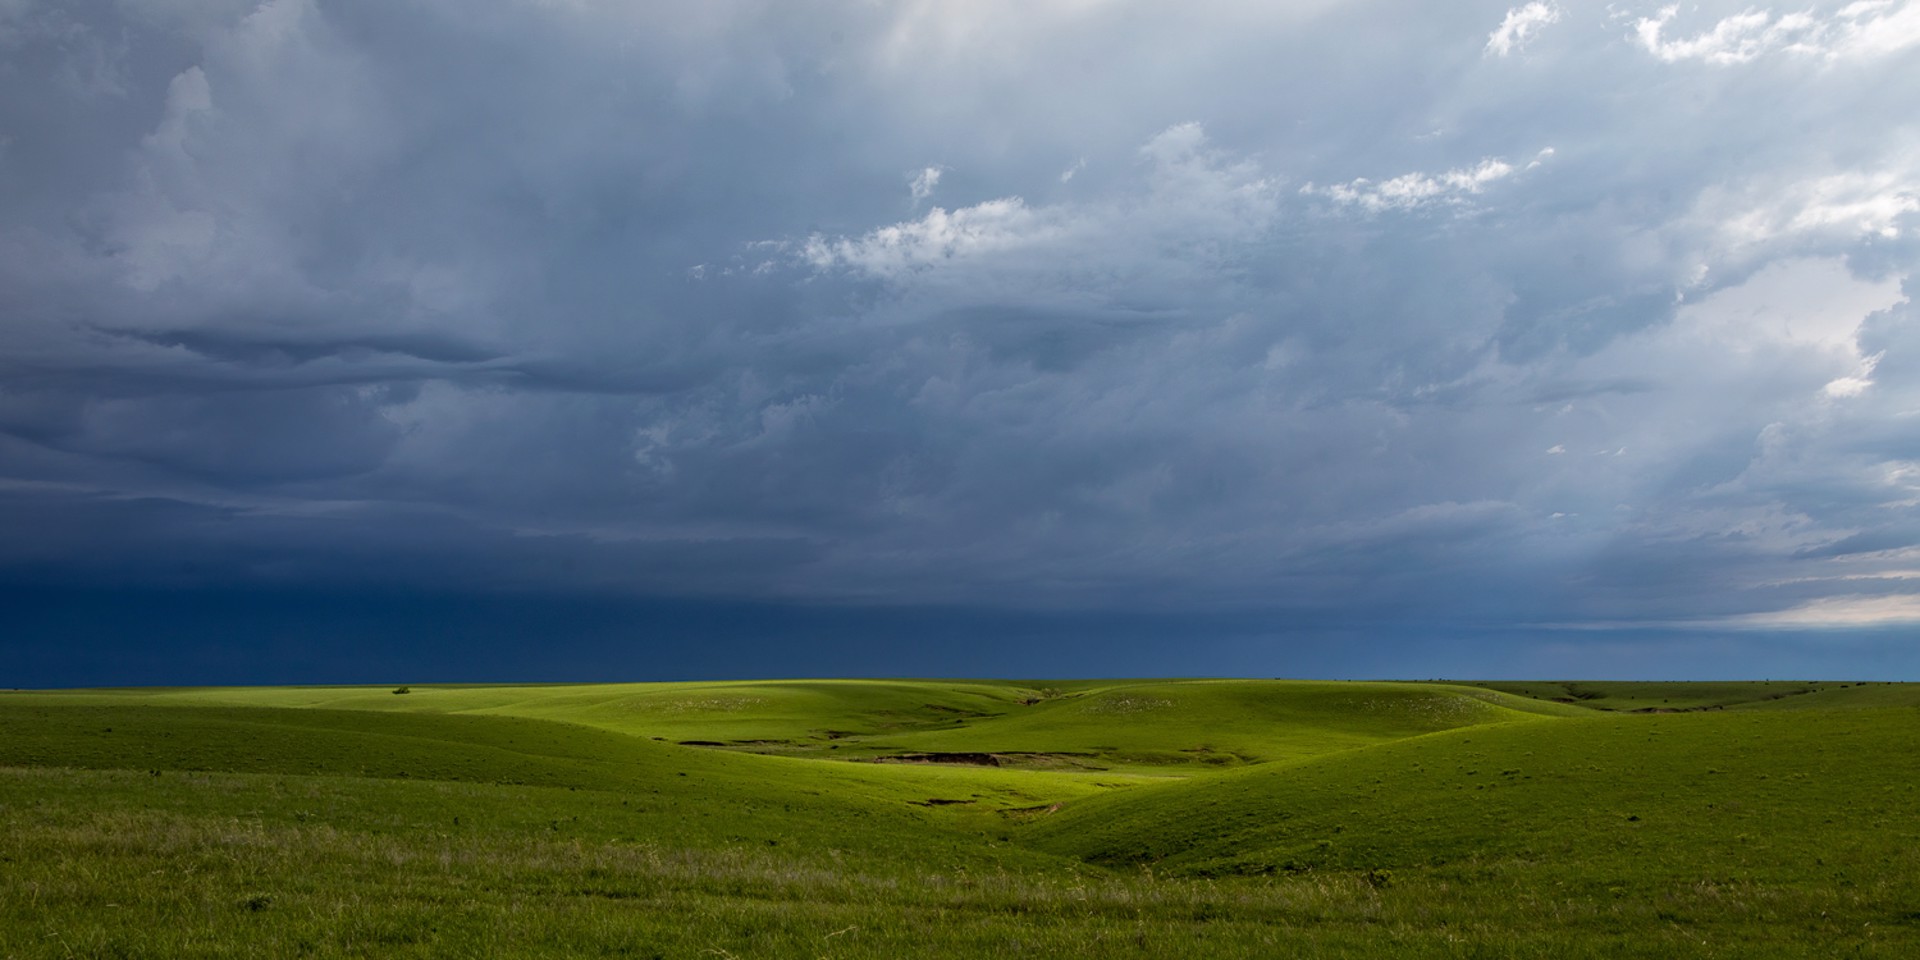 Before the Storm by Scott Bean